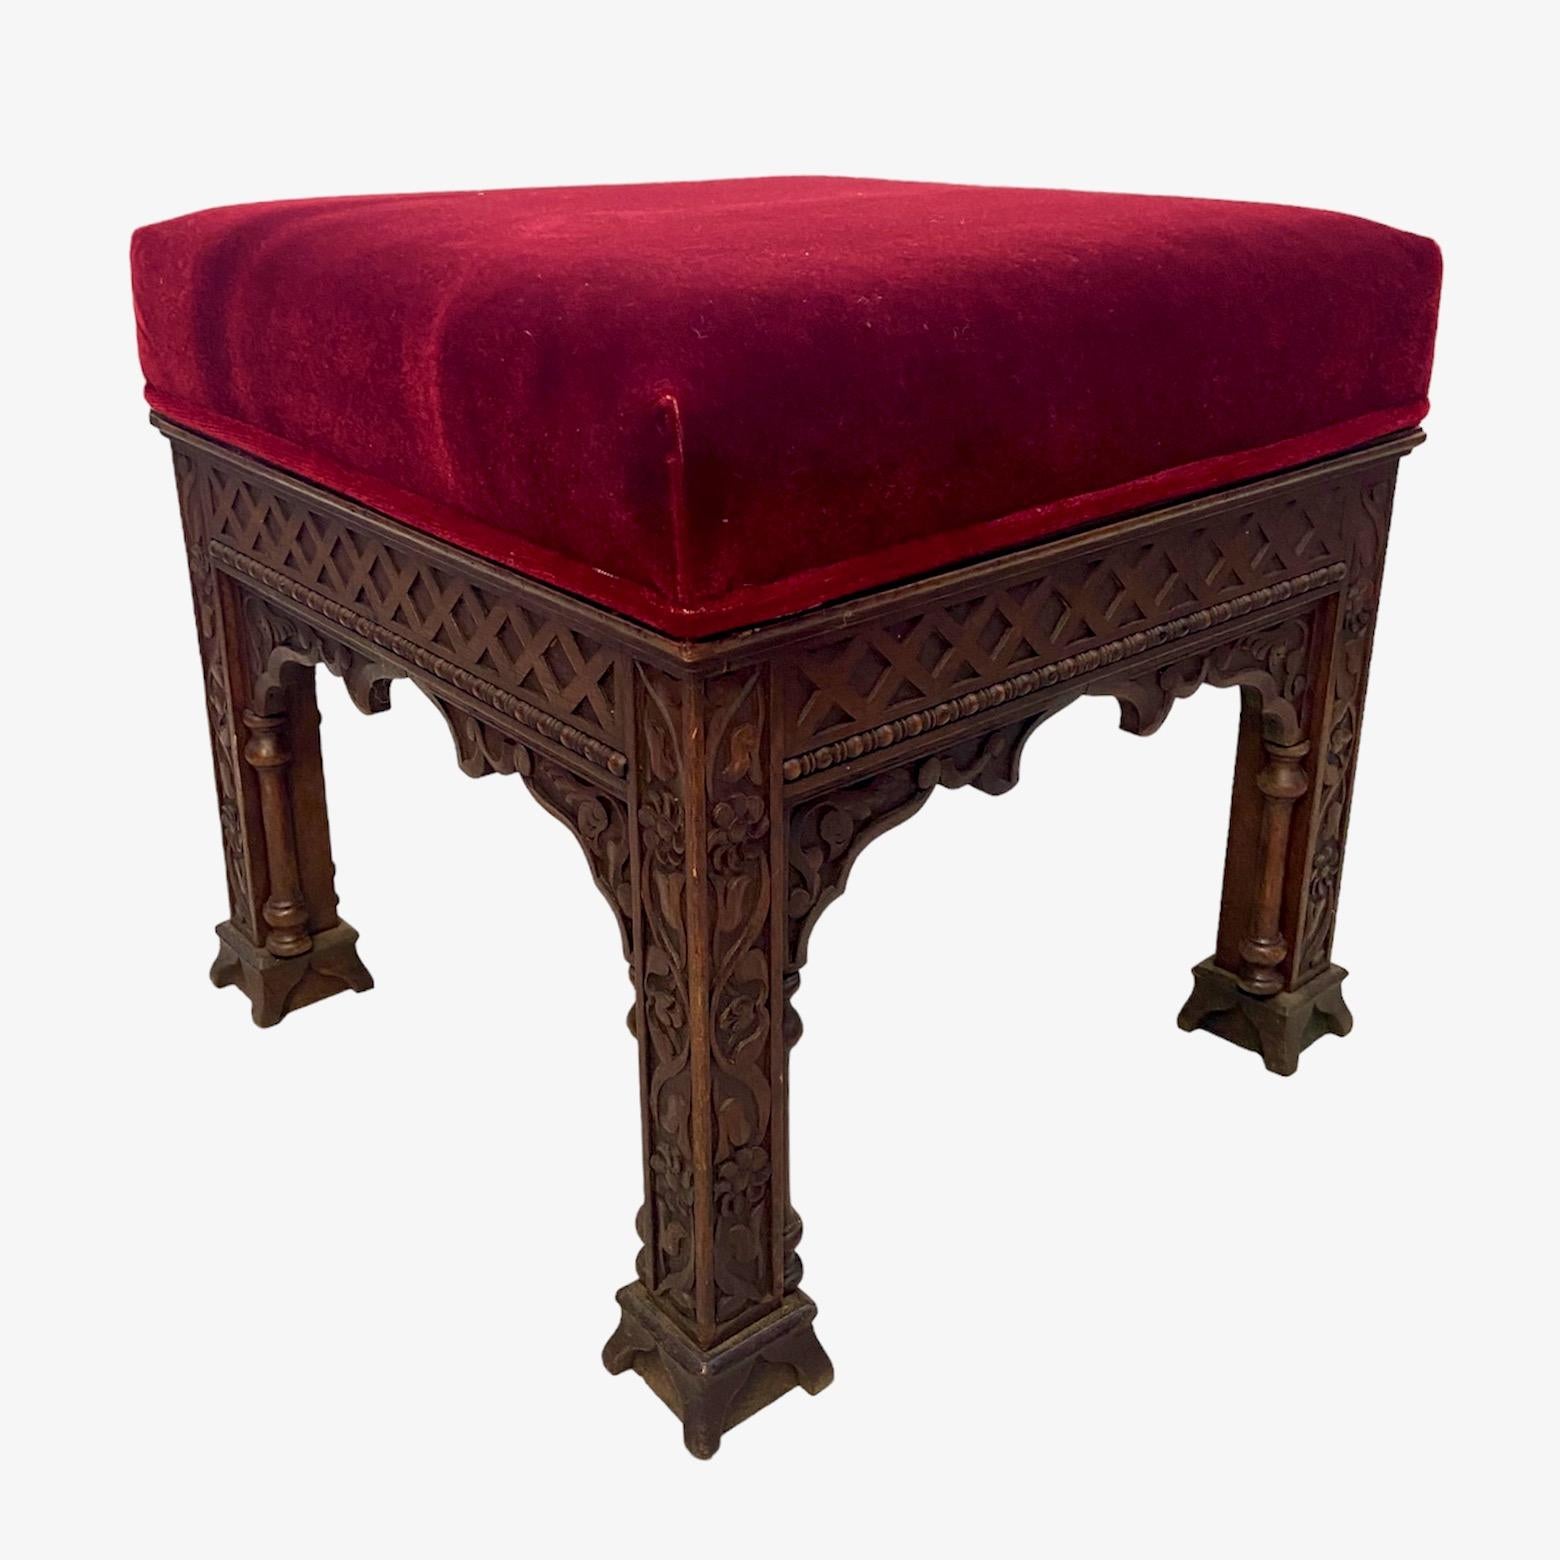 Velvet intricate victorian, arts and crafts moorish style stool, possibly Liberty For Sale